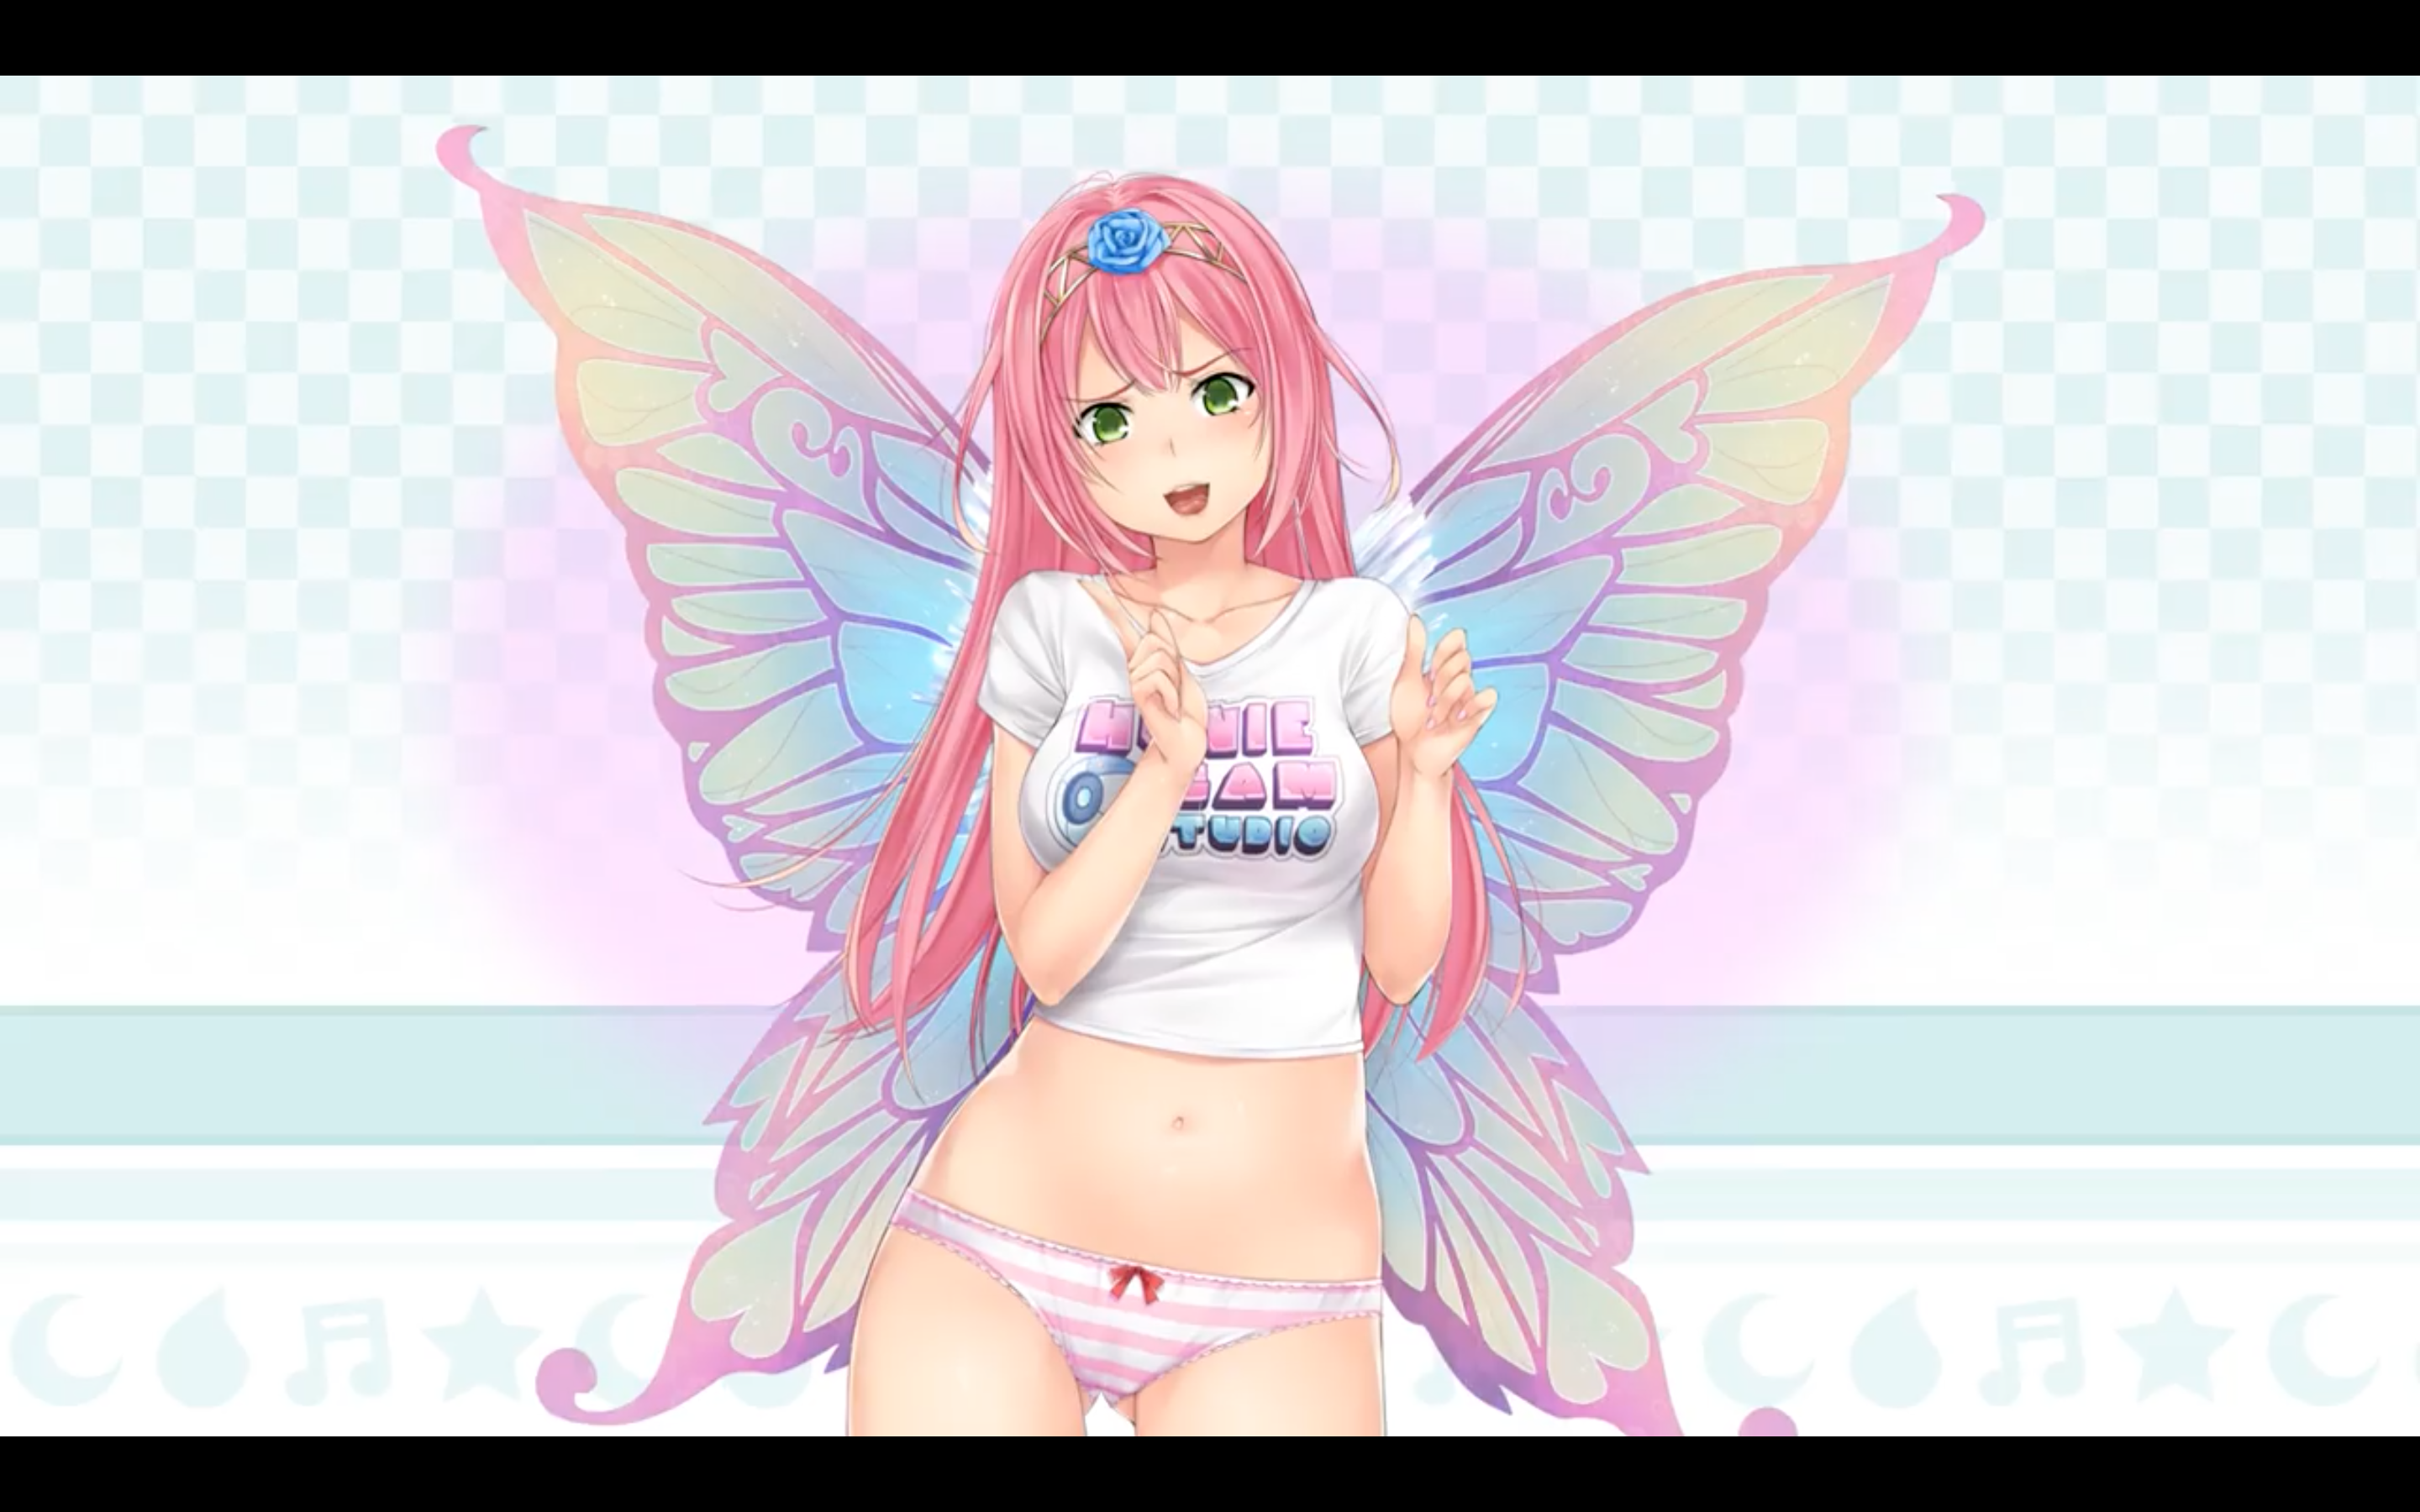 Huniepop 2 Fairy : If i'm not busy teaching virgins how to get lai...